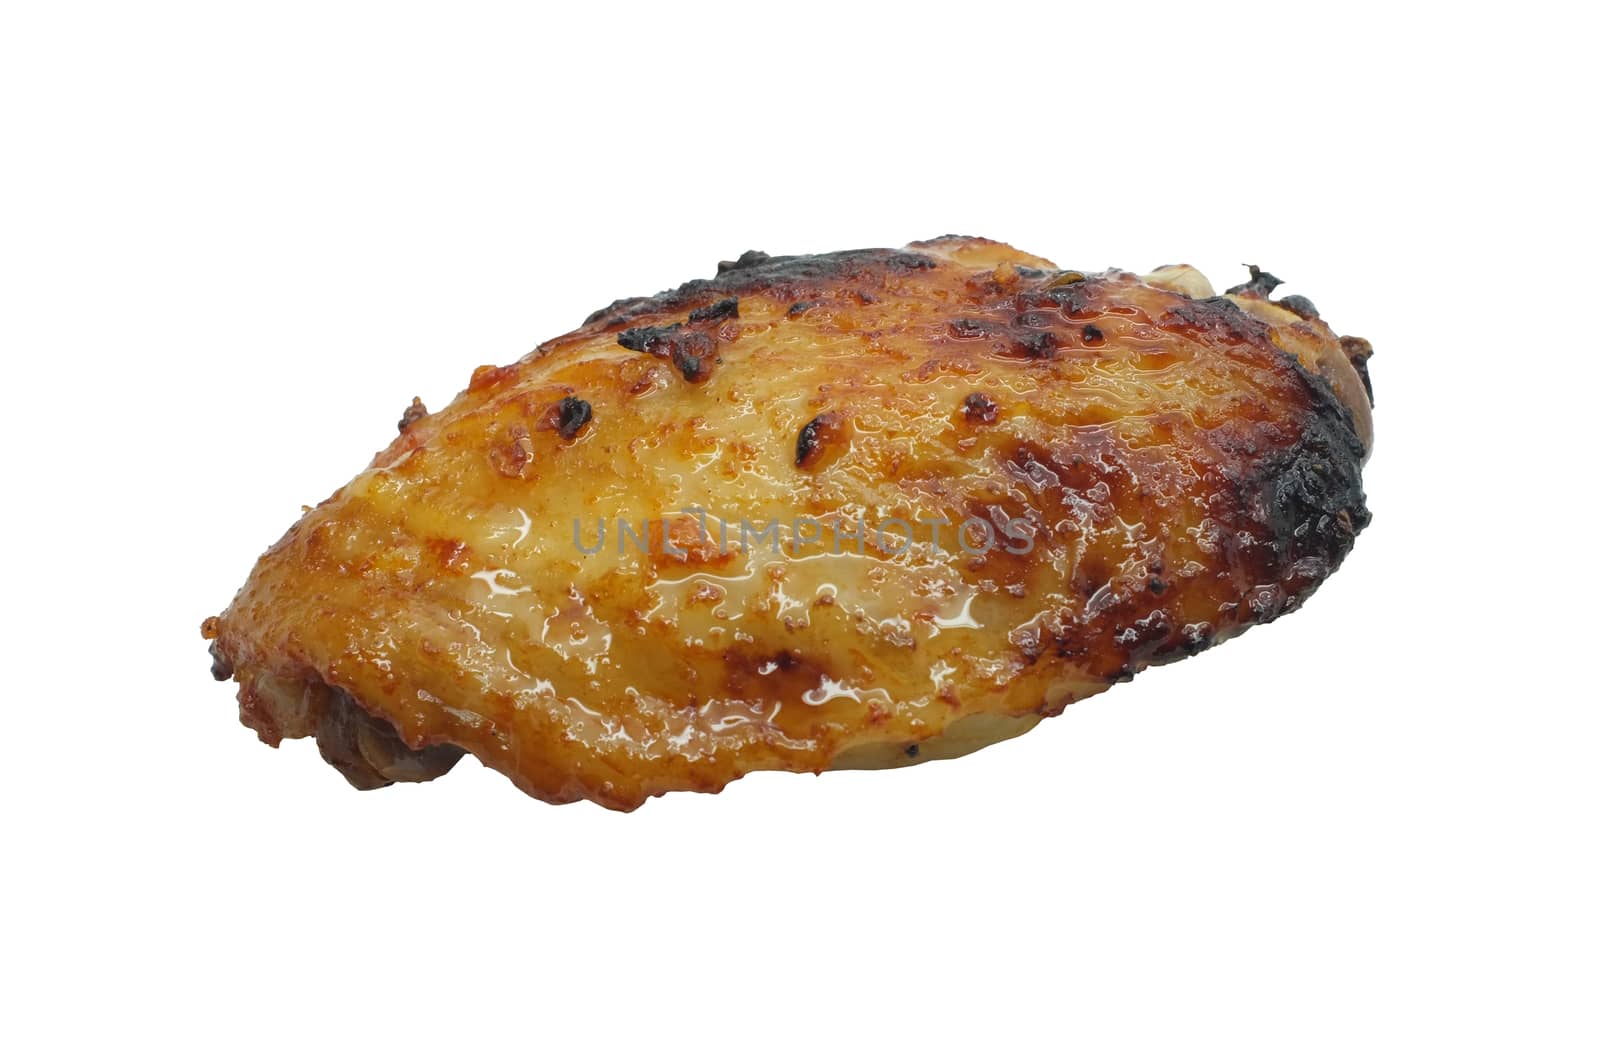 One grilled chicken wing